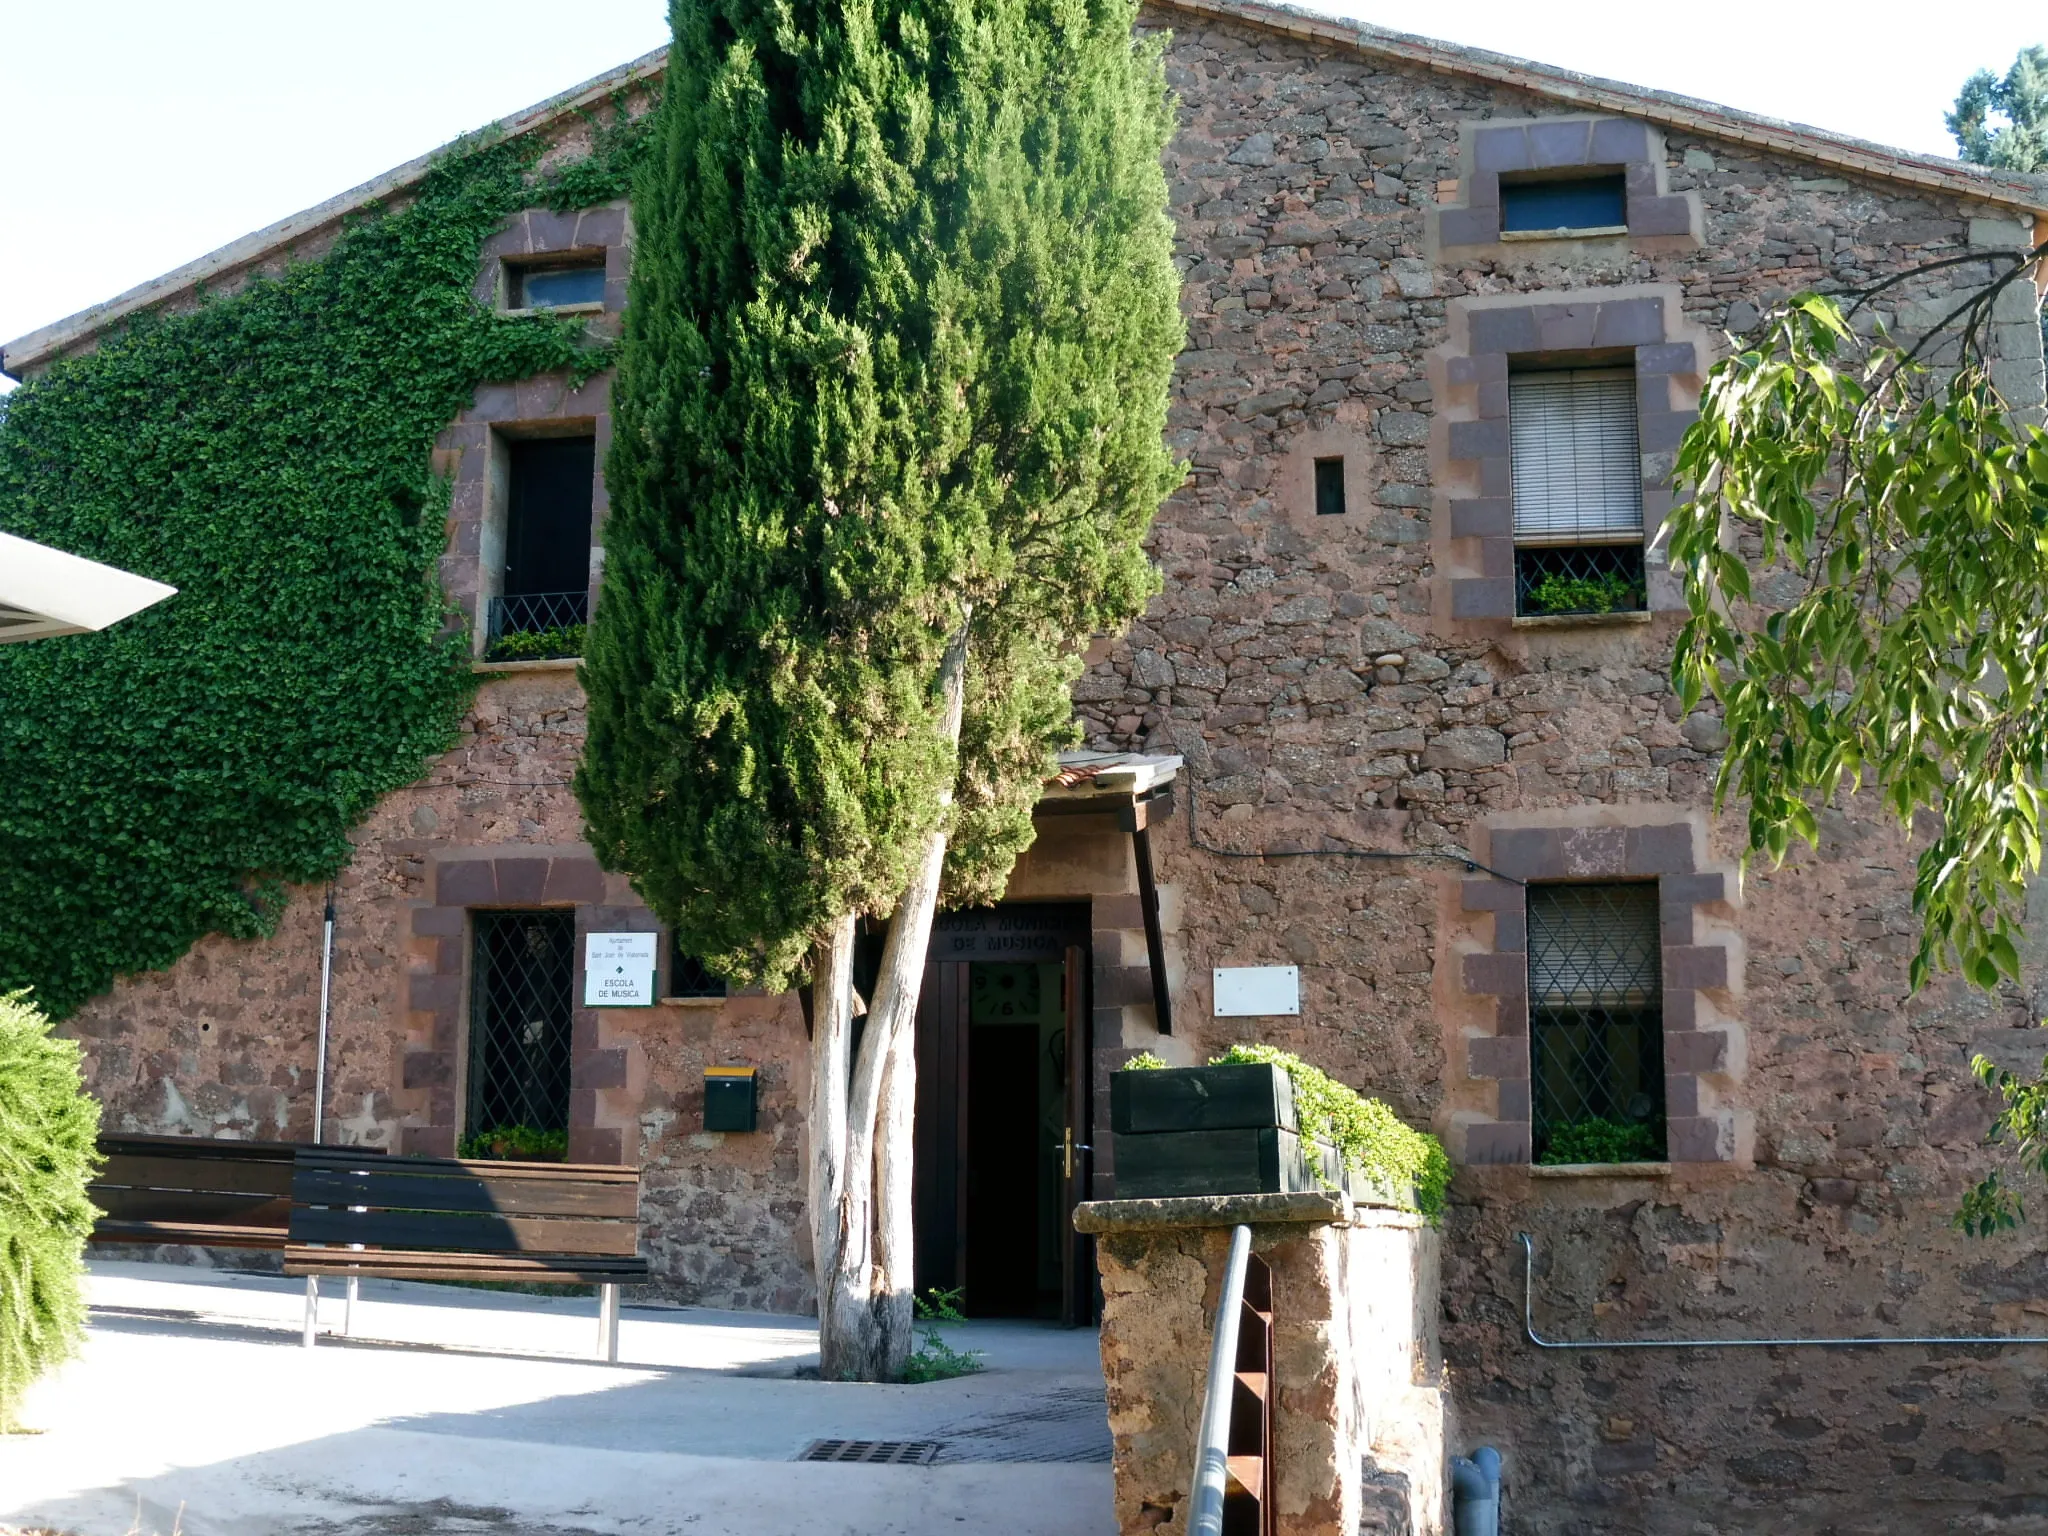 Photo showing: Mas de Sant Joan (Sant Joan de Vilatorrada)

This is a photo of a building indexed in the Catalan heritage register as Bé Cultural d'Interès Local (BCIL) under the reference IPA-17081.